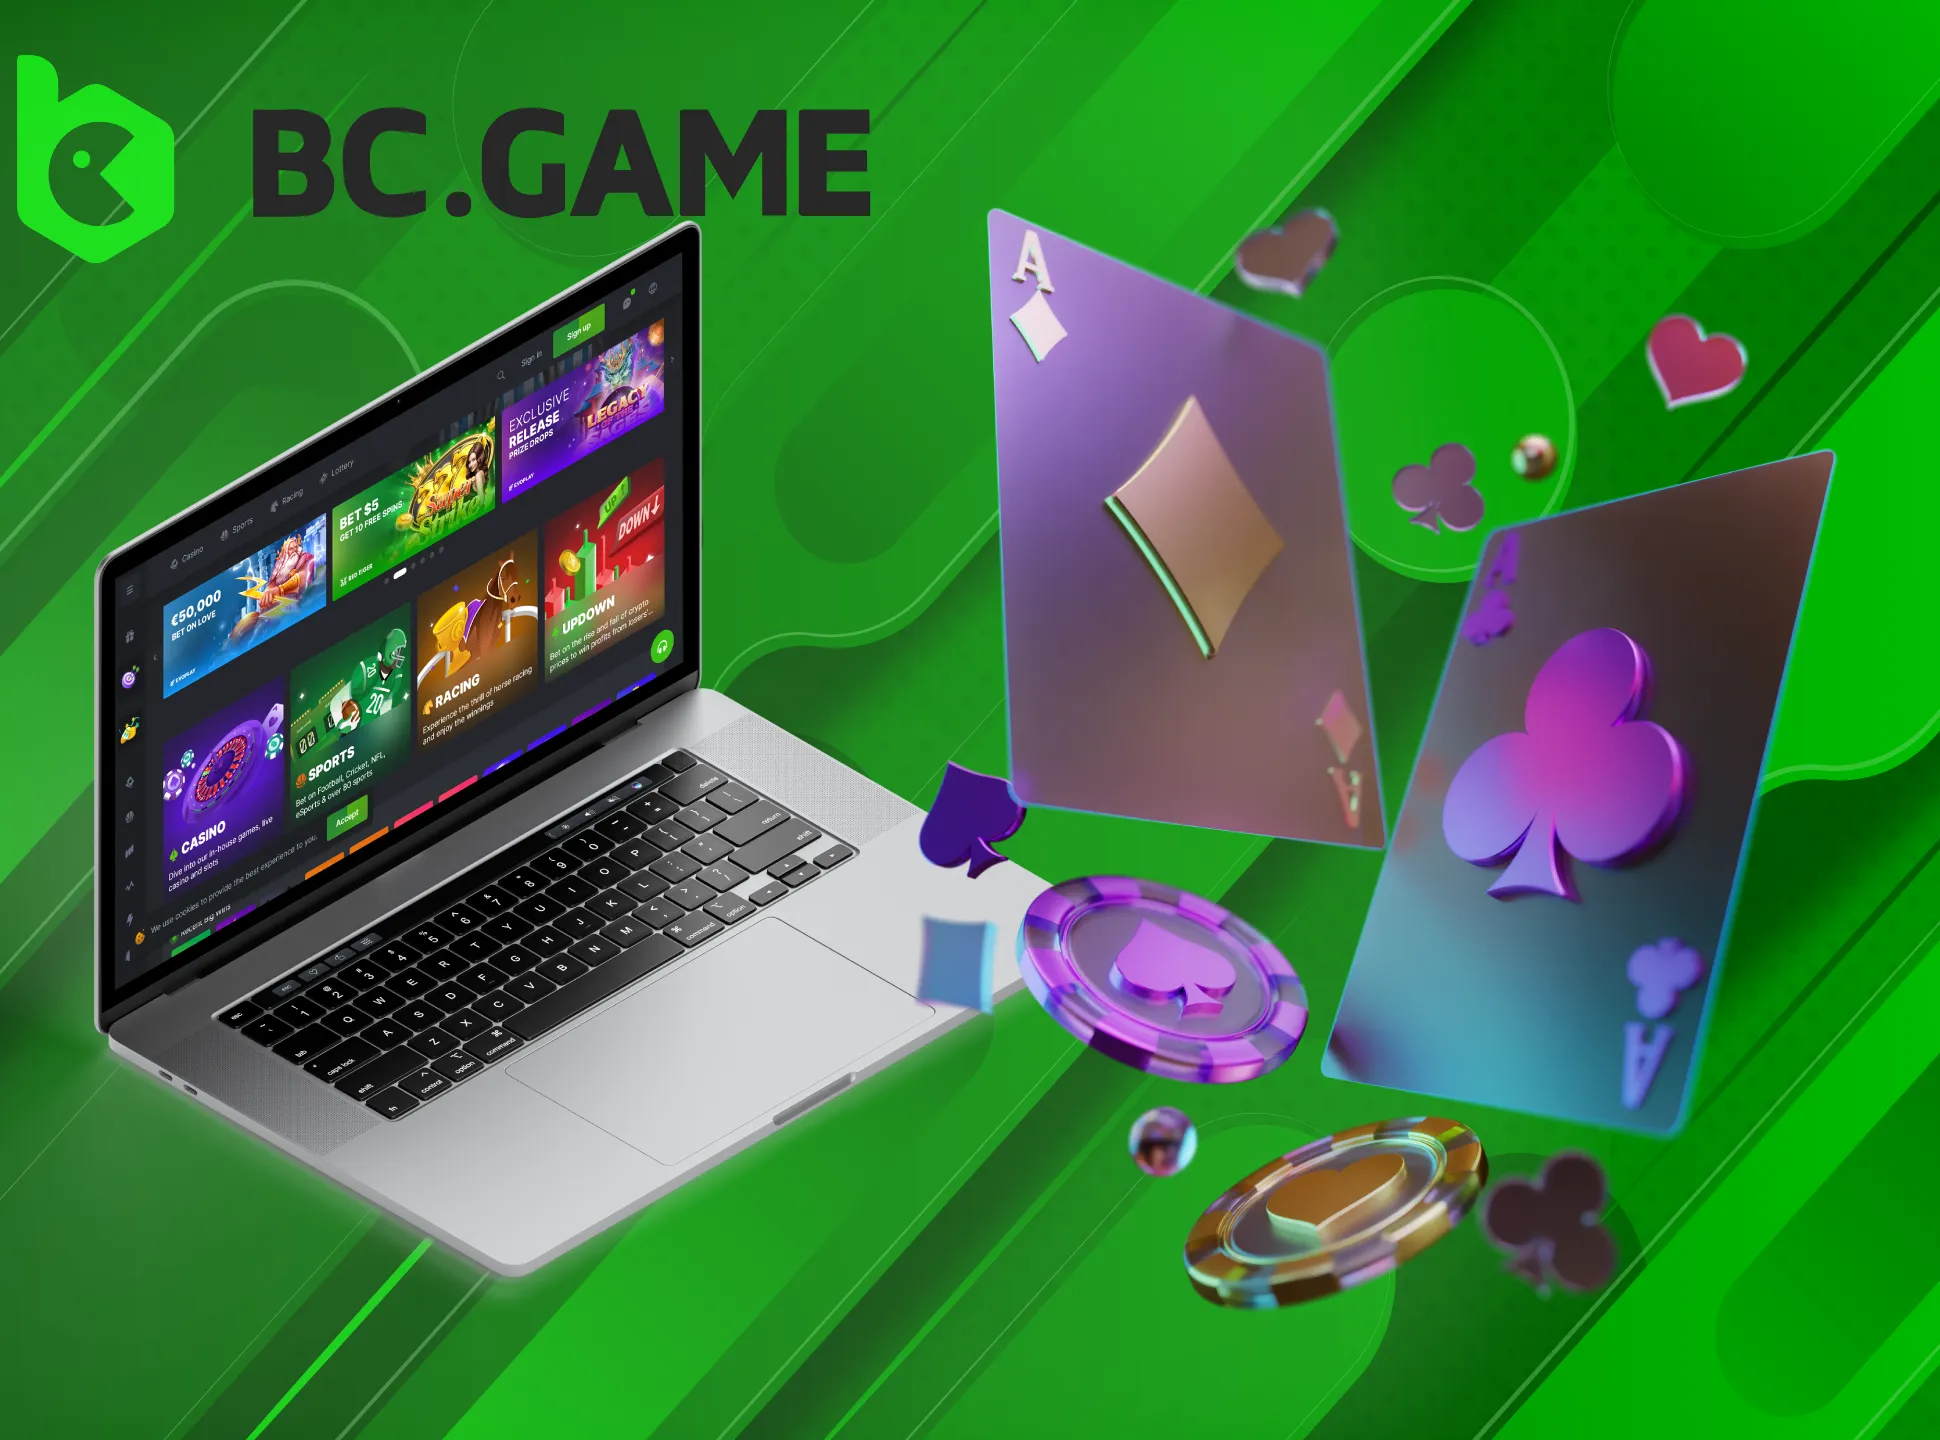 The high level of graphics and performance provides BC Game casino for any computer.